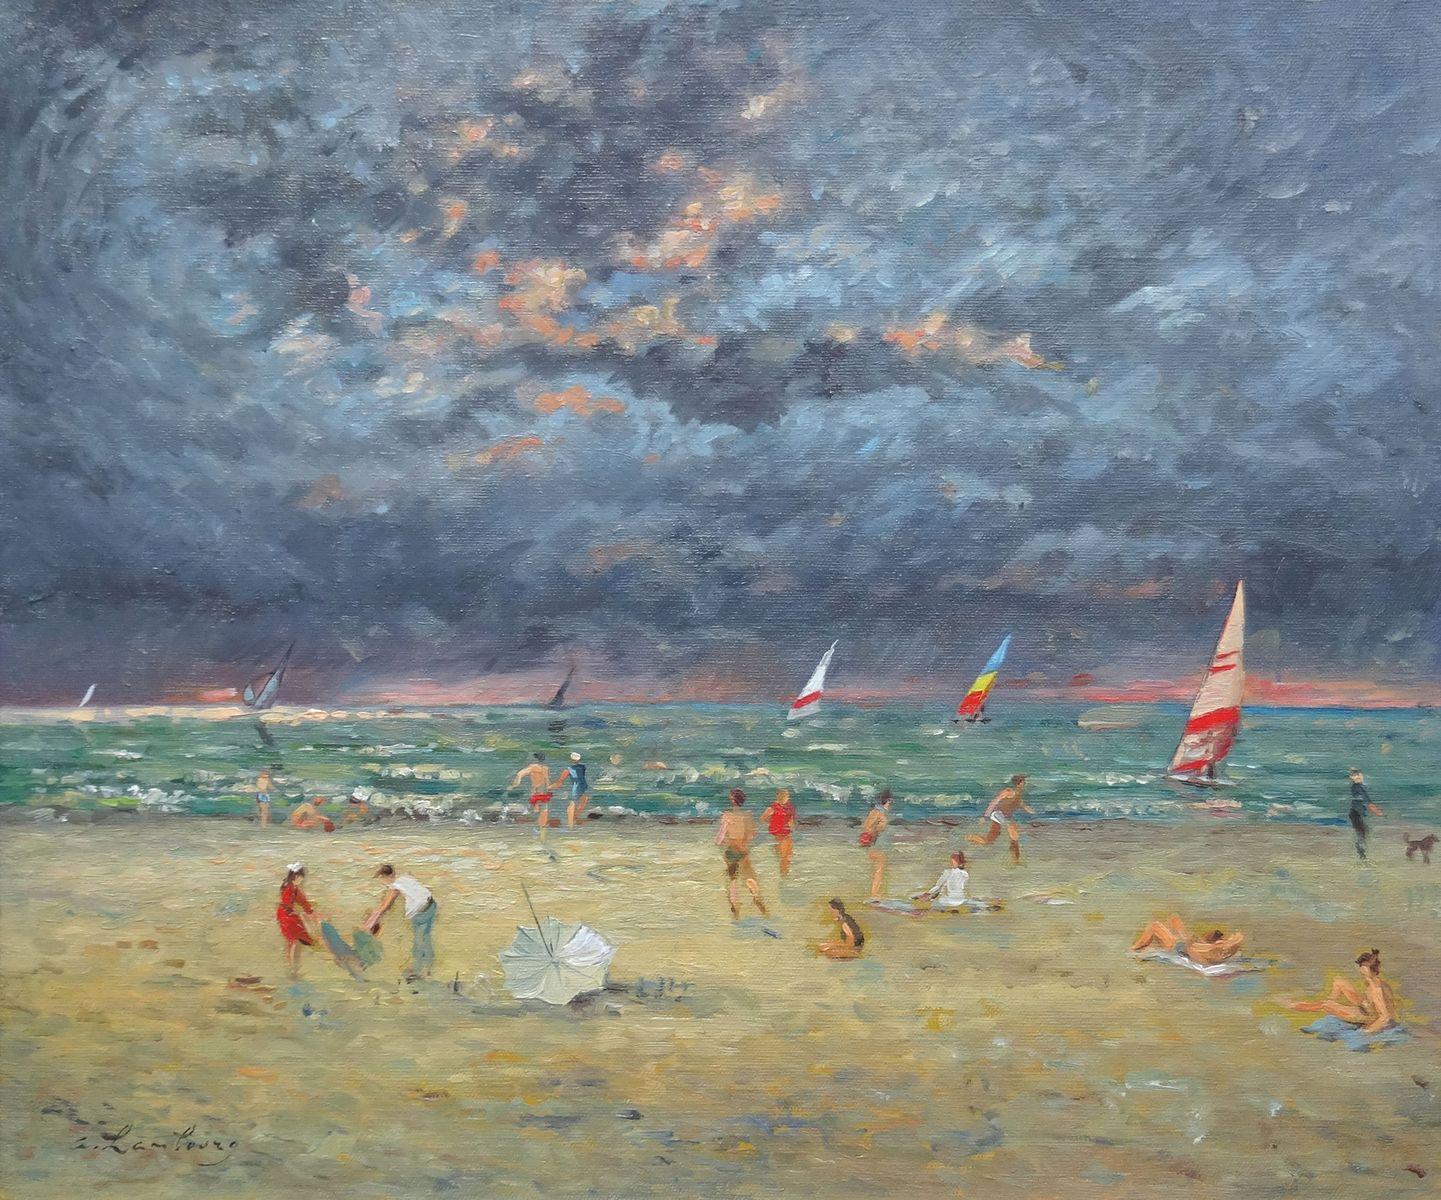 Andre Hambourg Landscape Painting - Nice time on Trouville beach. 1980. Canvas, oil, 44.5x52 cm